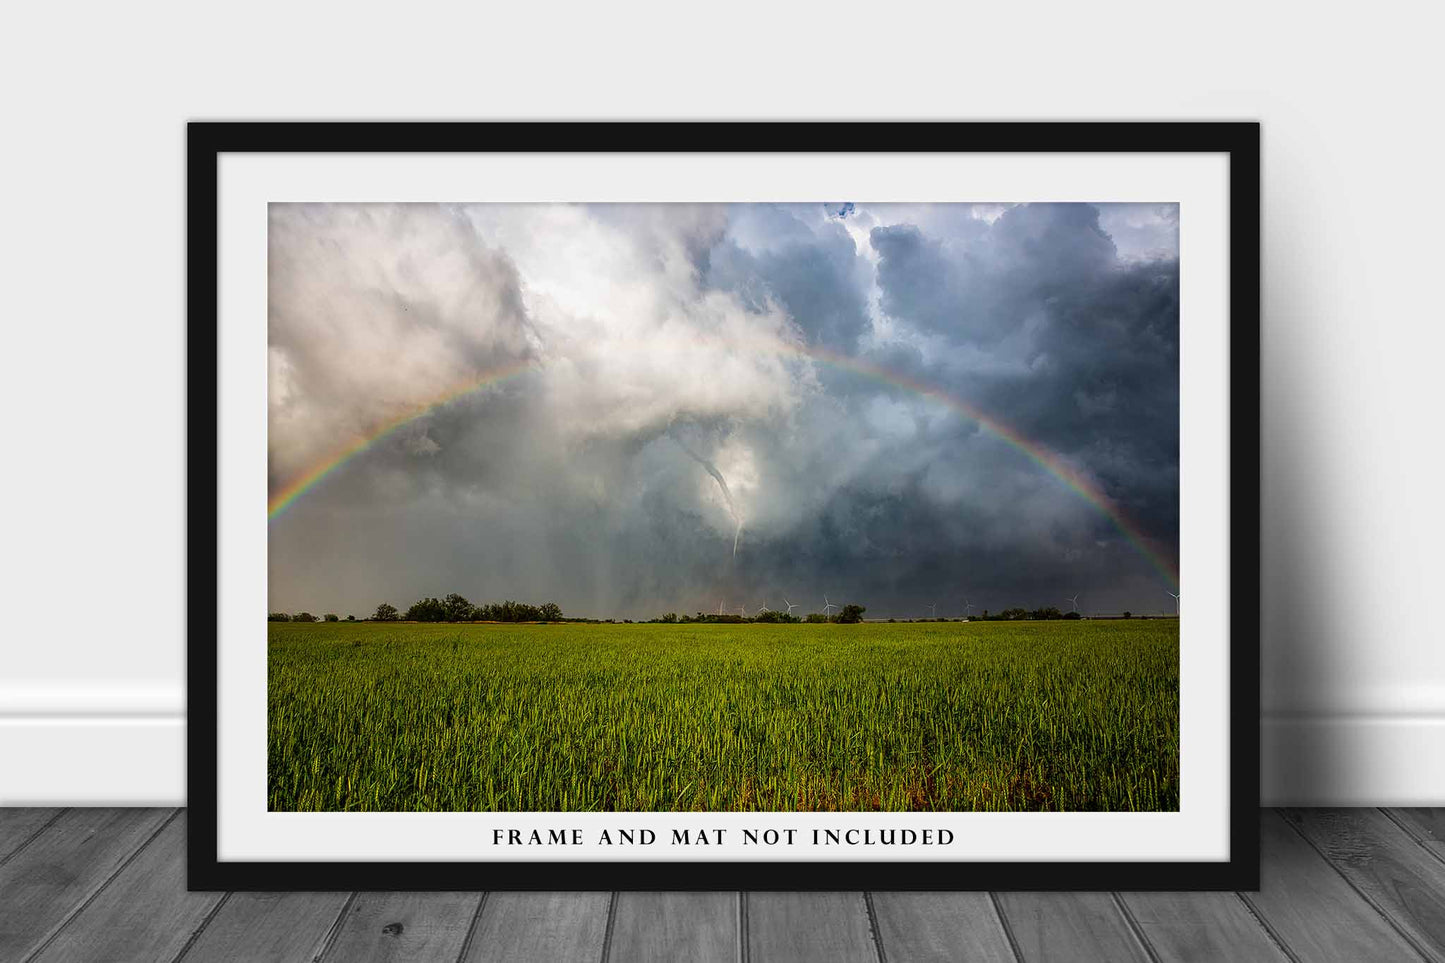 Storm Photography Print (Not Framed) Picture of Tornado Roping Out Under Full Rainbow on Stormy Spring Day in Texas Thunderstorm Wall Art Nature Decor